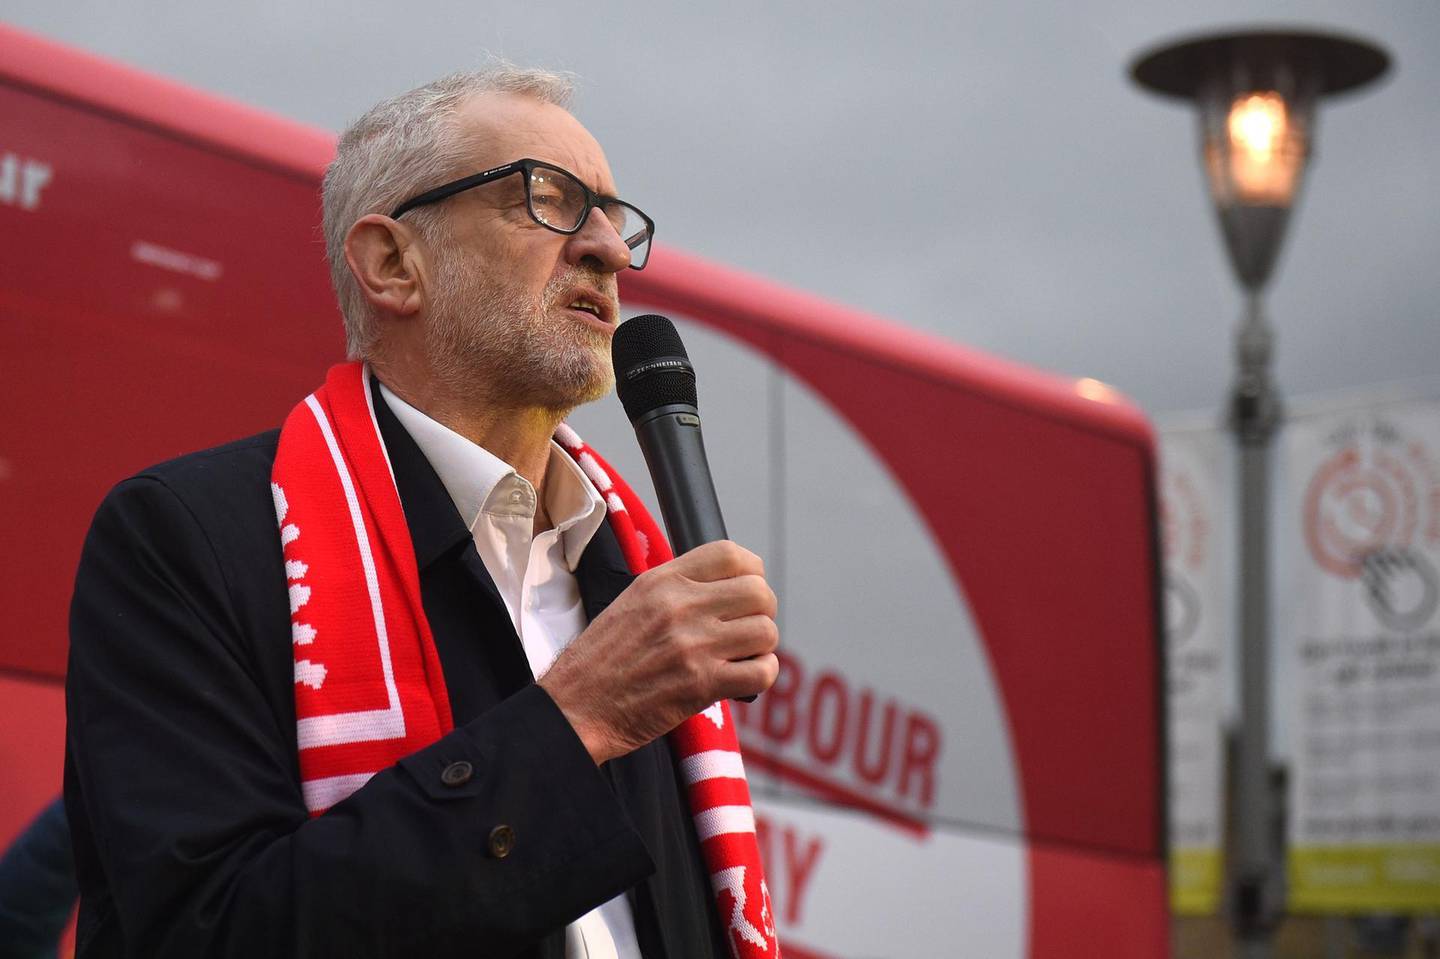 Opposition Labour party leader Jeremy Corbyn speaks during a campaign event in Nelson, northwest England on December 10, 2019. Britain will go to the polls on December 12, 2019 to vote in a pre-Christmas general election. / AFP / Oli SCARFF                          
